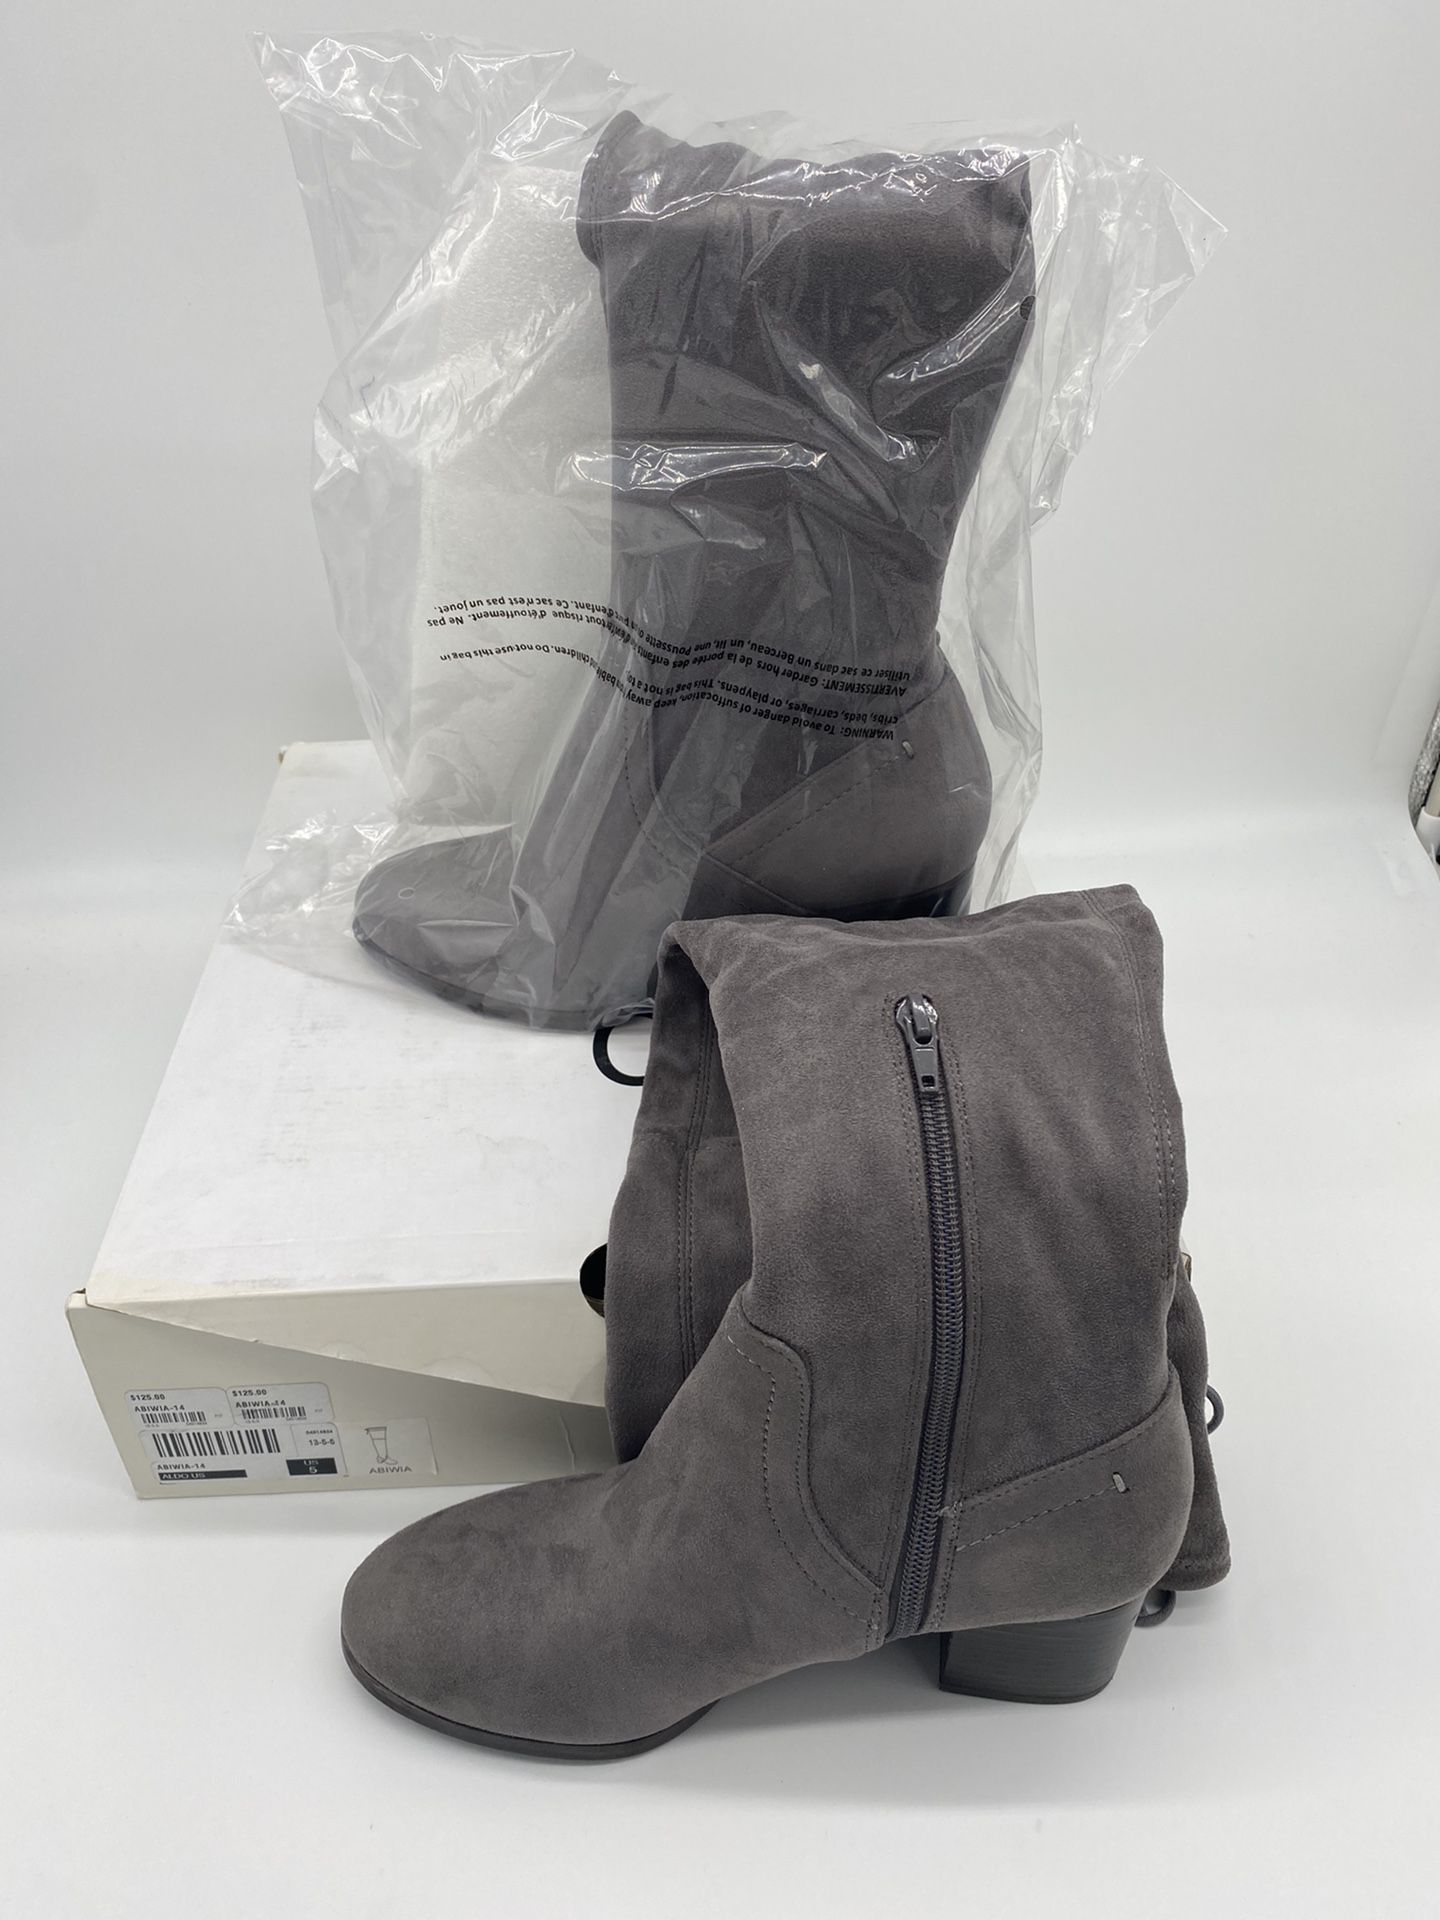 Aldo - Abiwia -14 Gray Kneew High boots  New with tags & in the box   Size 5 Retail price is $125